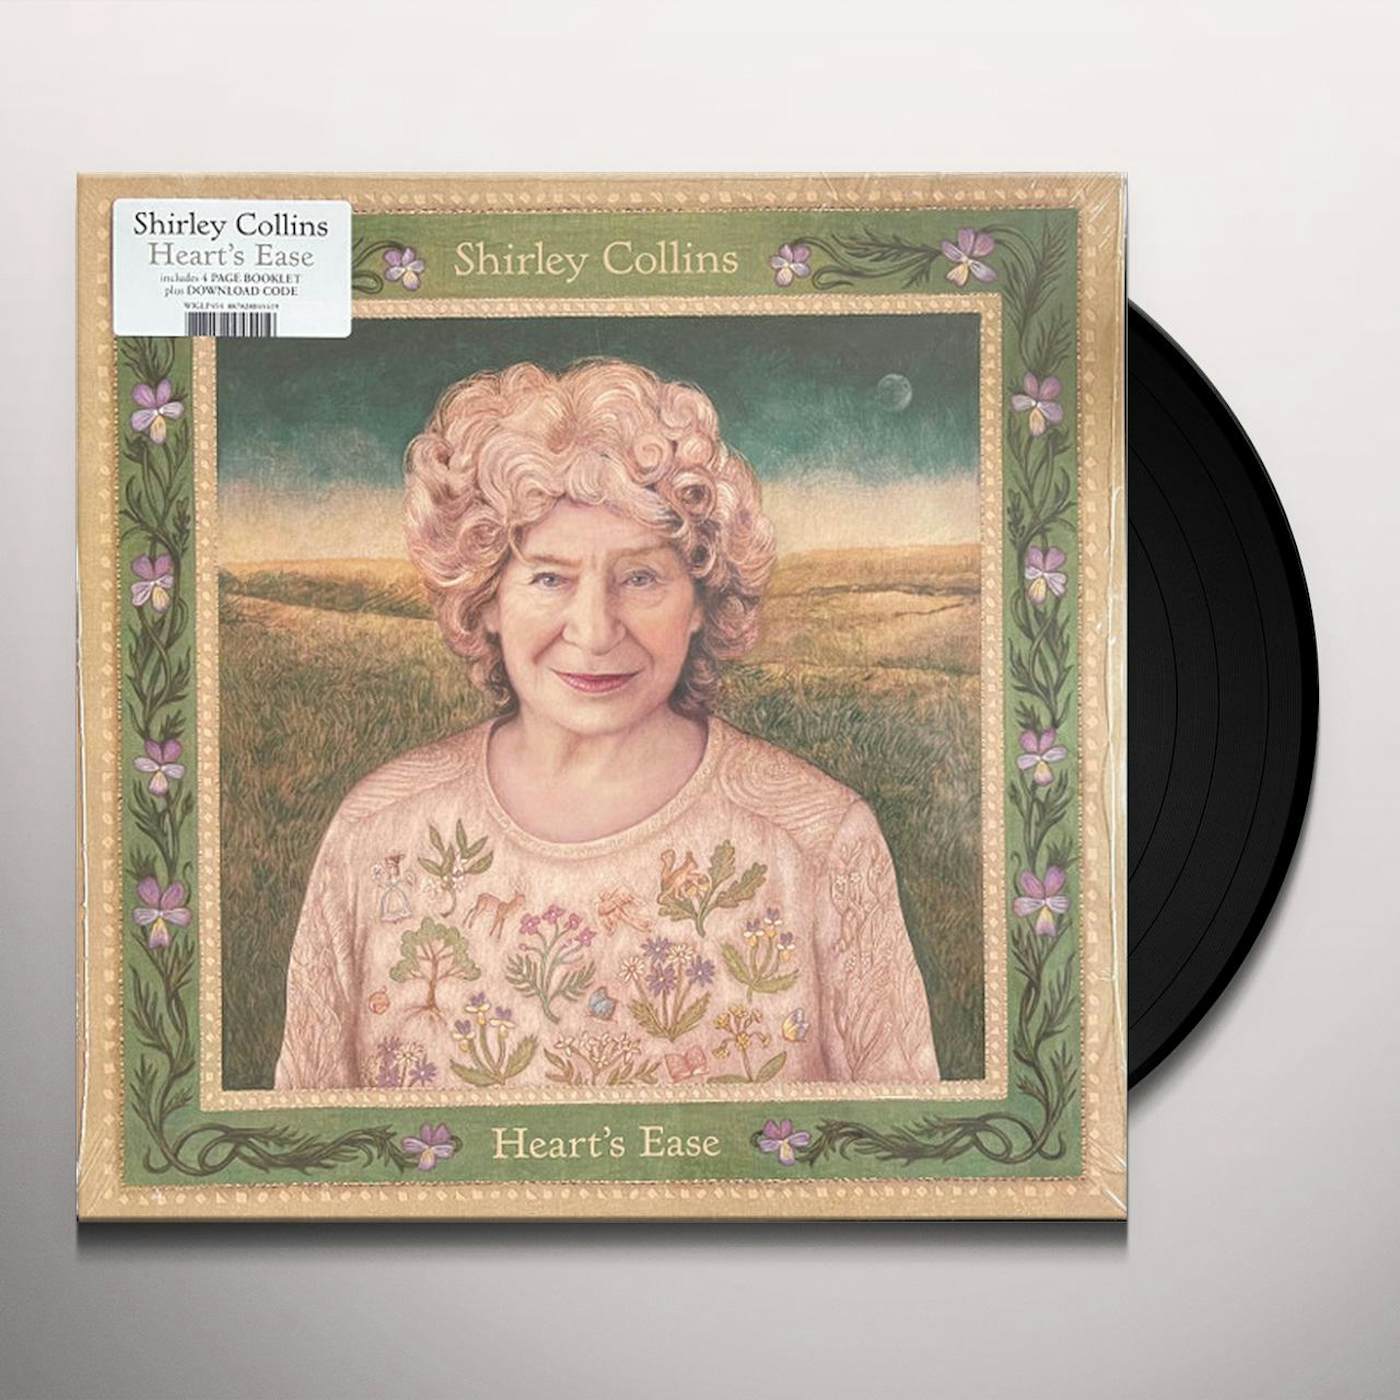 Shirley Collins HEART'S EASE (DL CARD) Vinyl Record